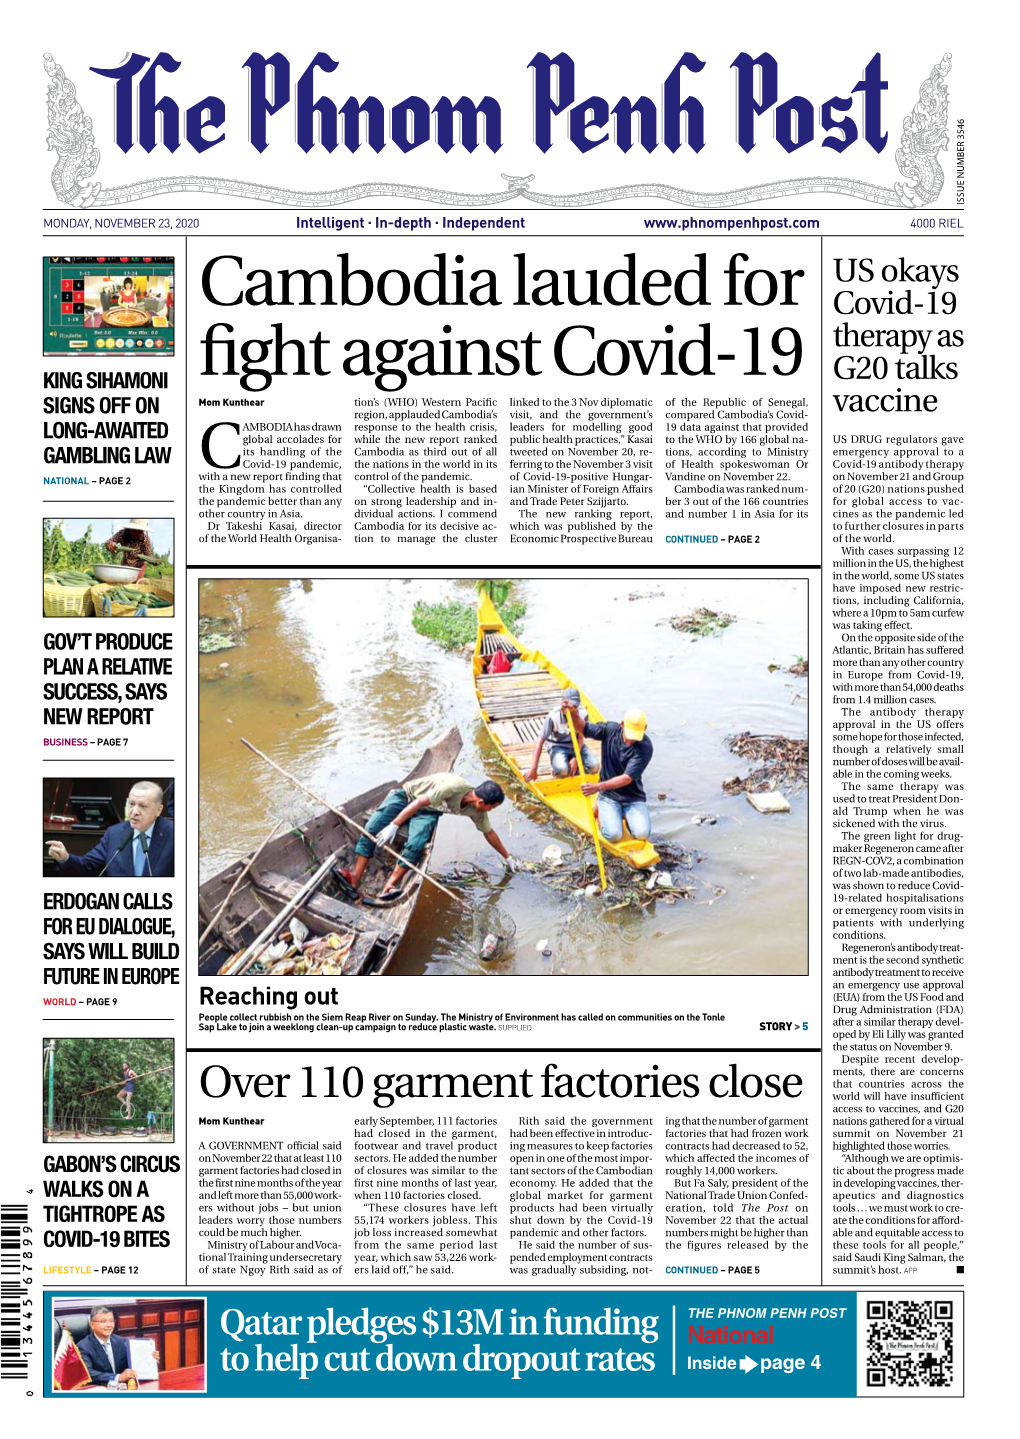 Cambodia Lauded for Fight Against Covid-19